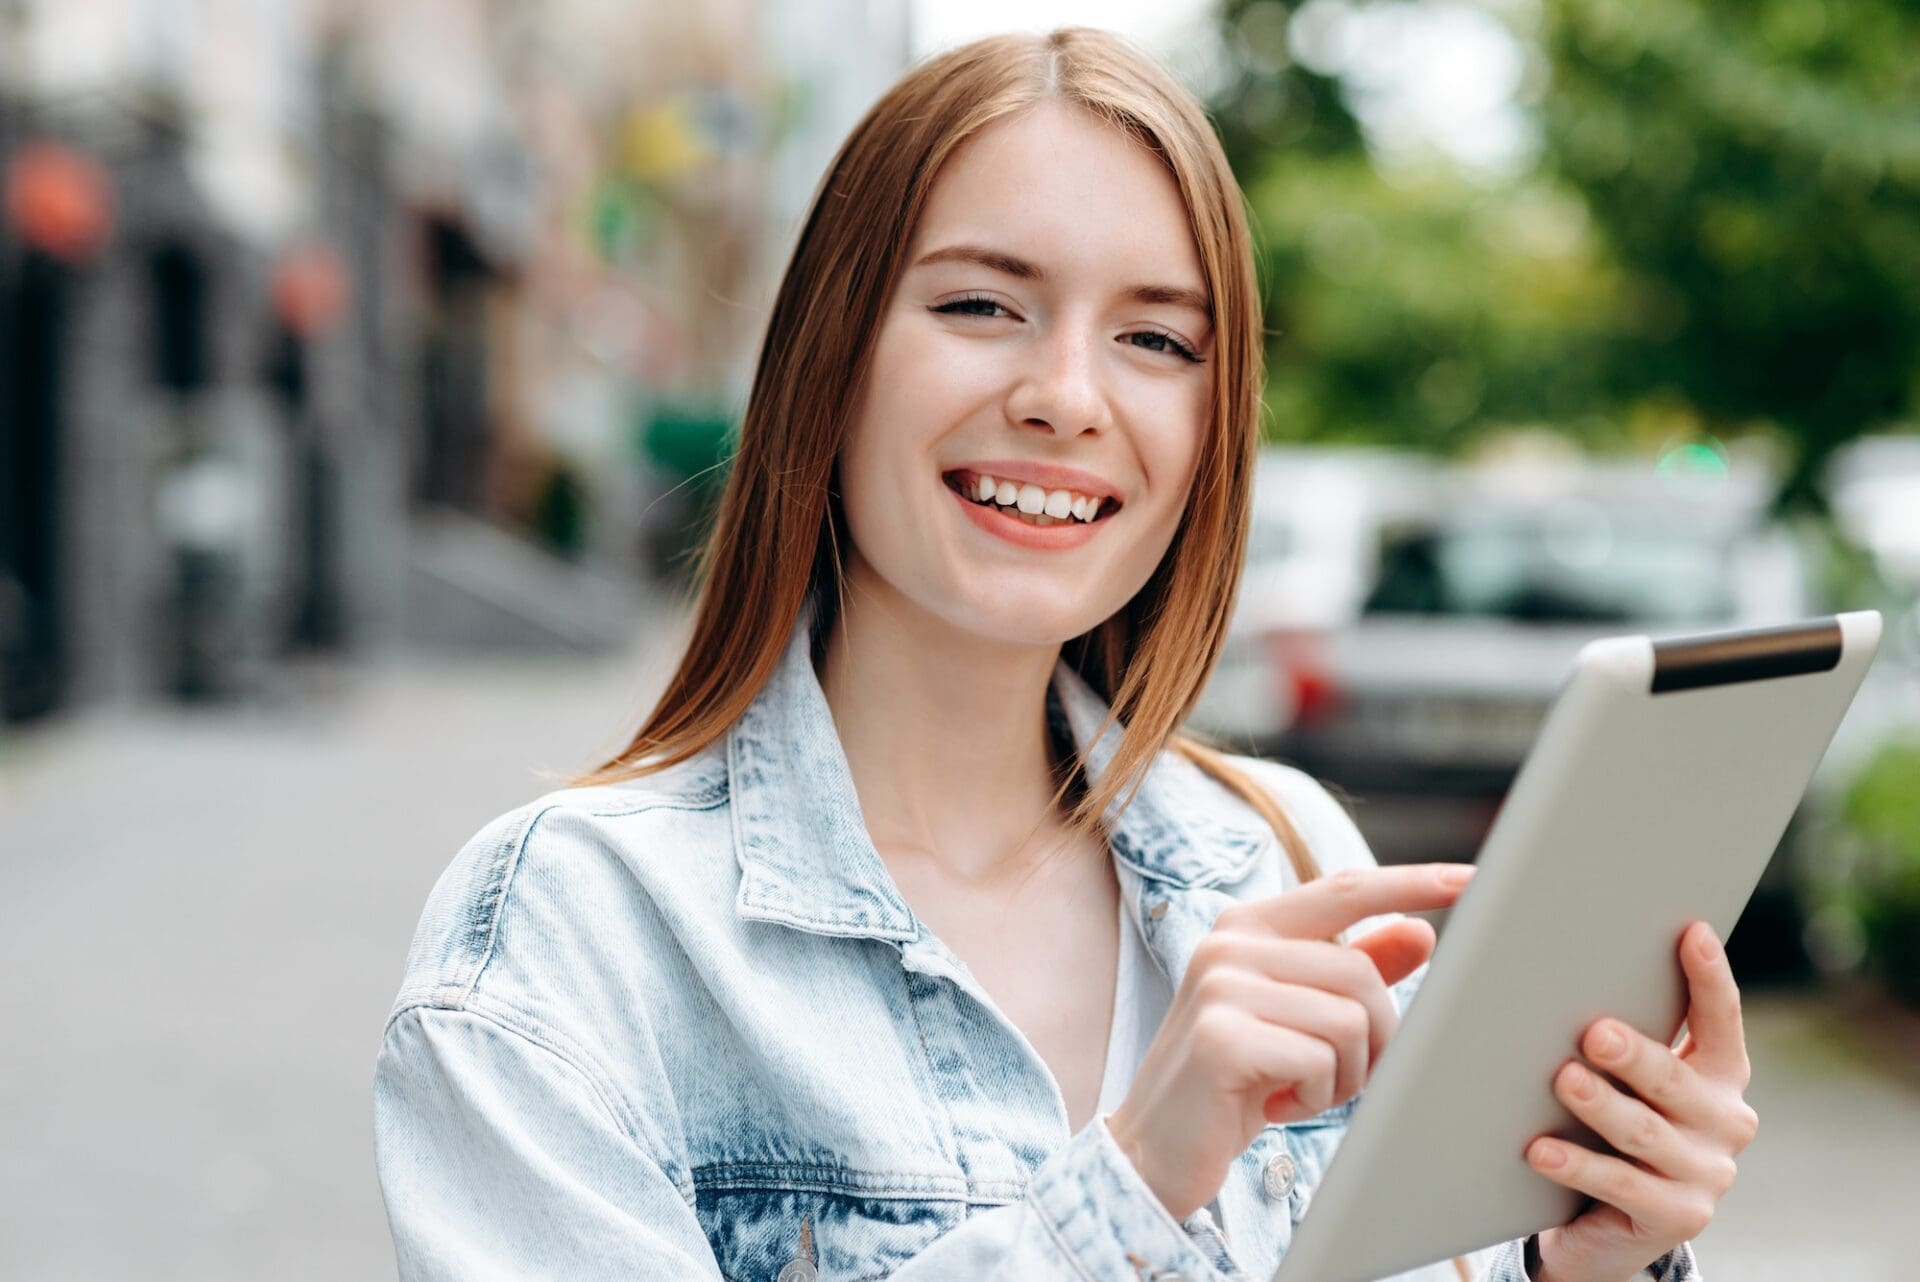 Closeup portrait of young woman holding an ipad and standing outdoor- Image